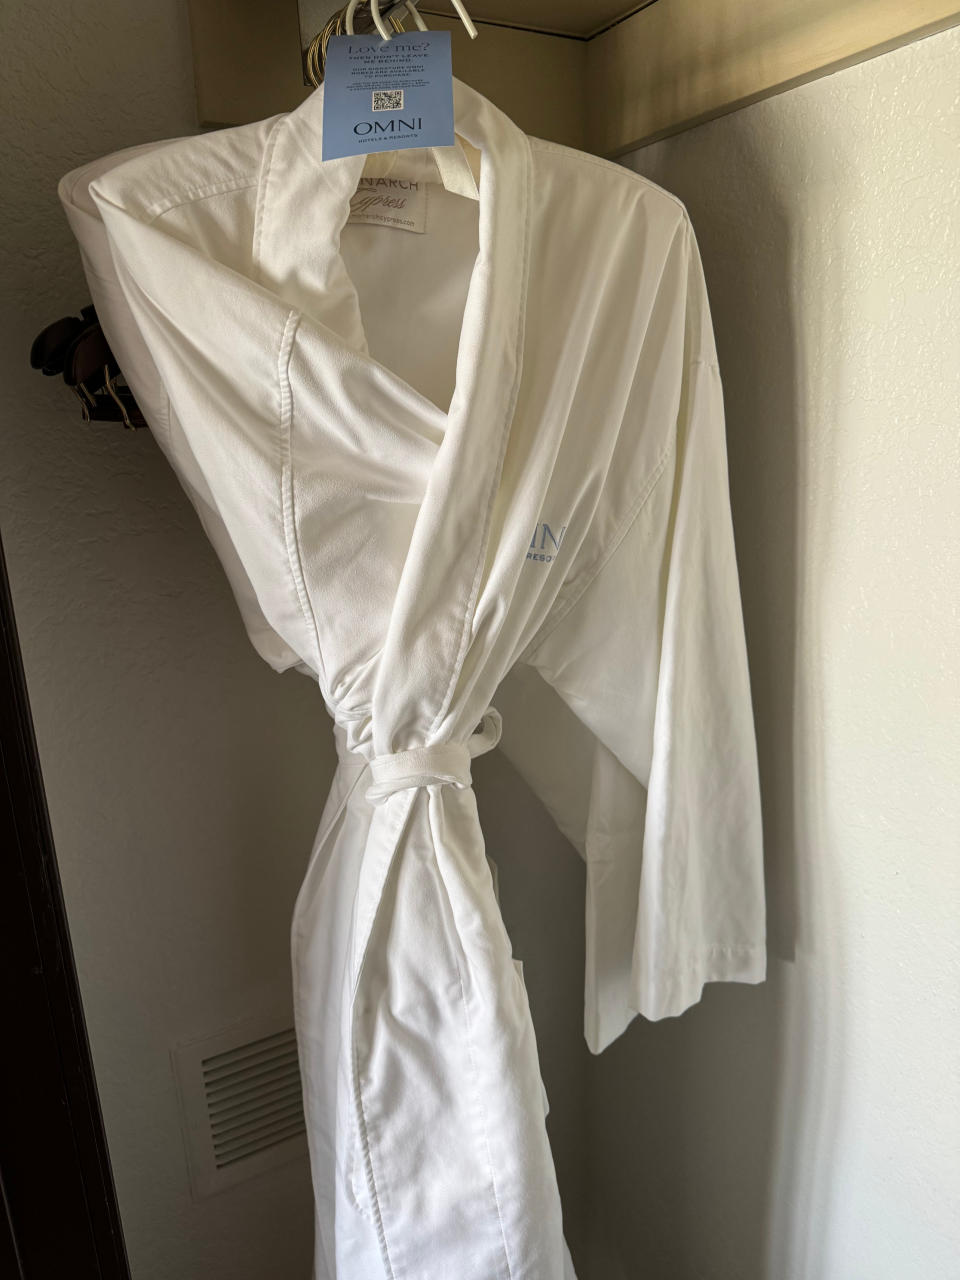 White bathrobe with "Omni" brand logo hanging on a door, possibly from a hotel room